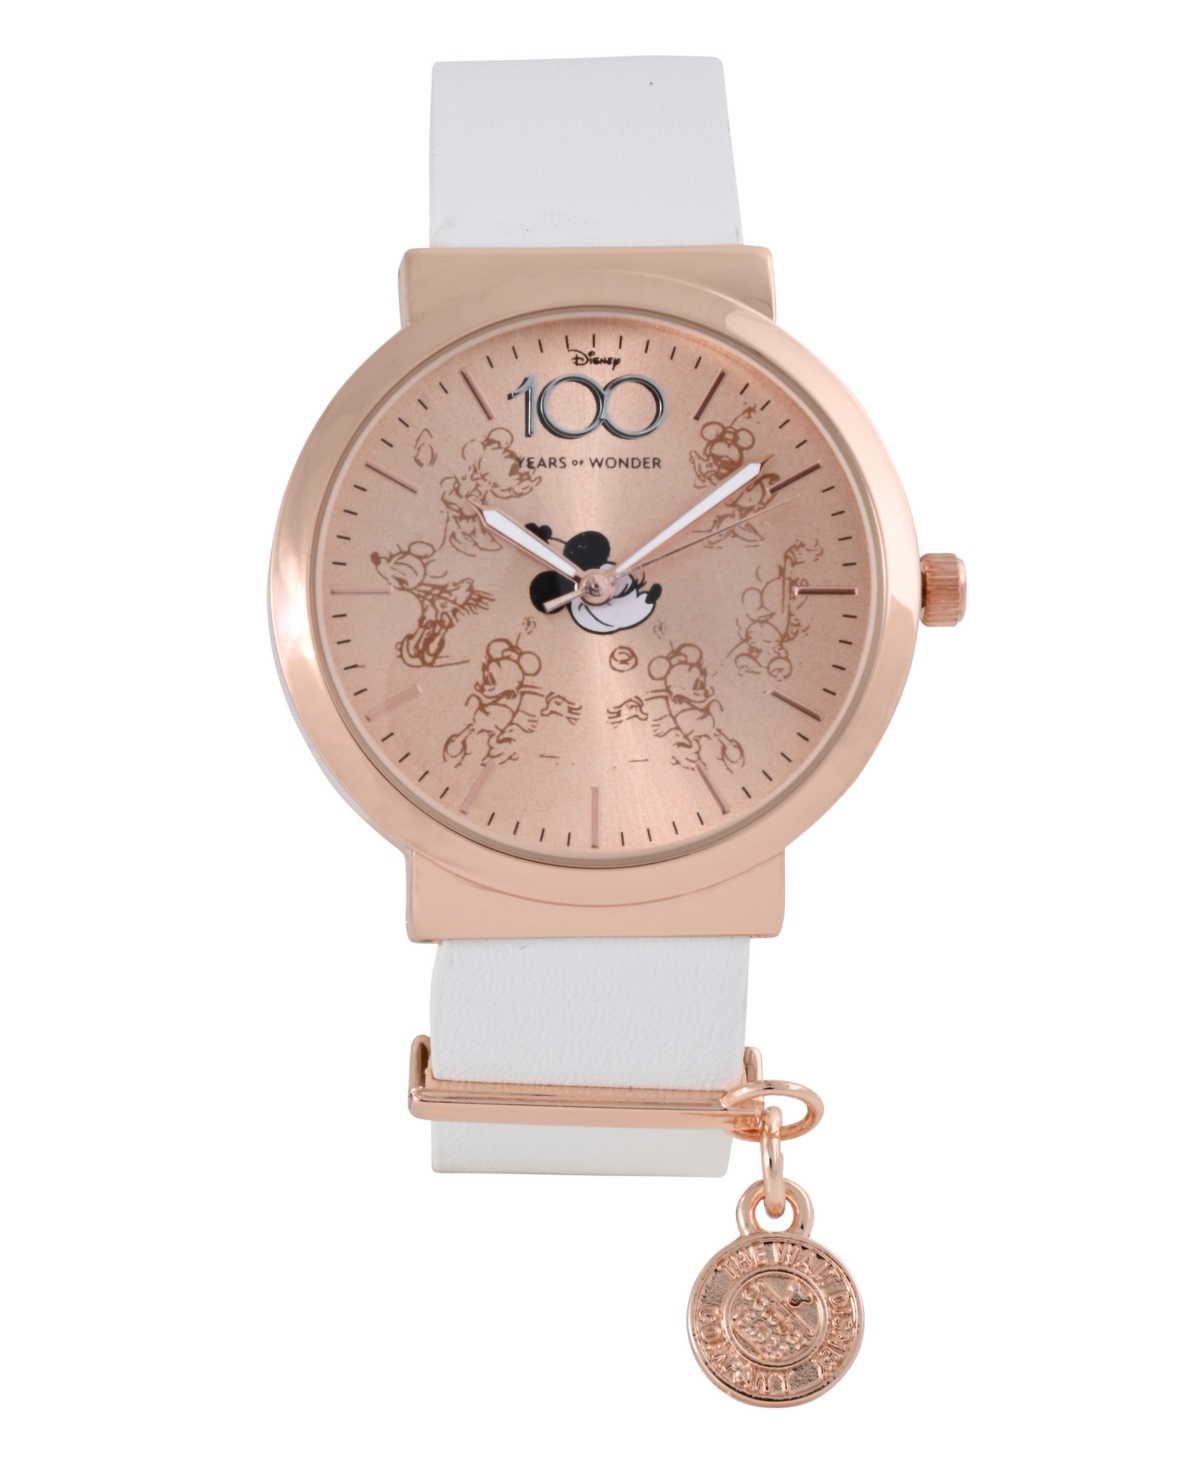 Accutime Women's Disney 100th Anniversary Analog White Faux Leather Watch 32mm